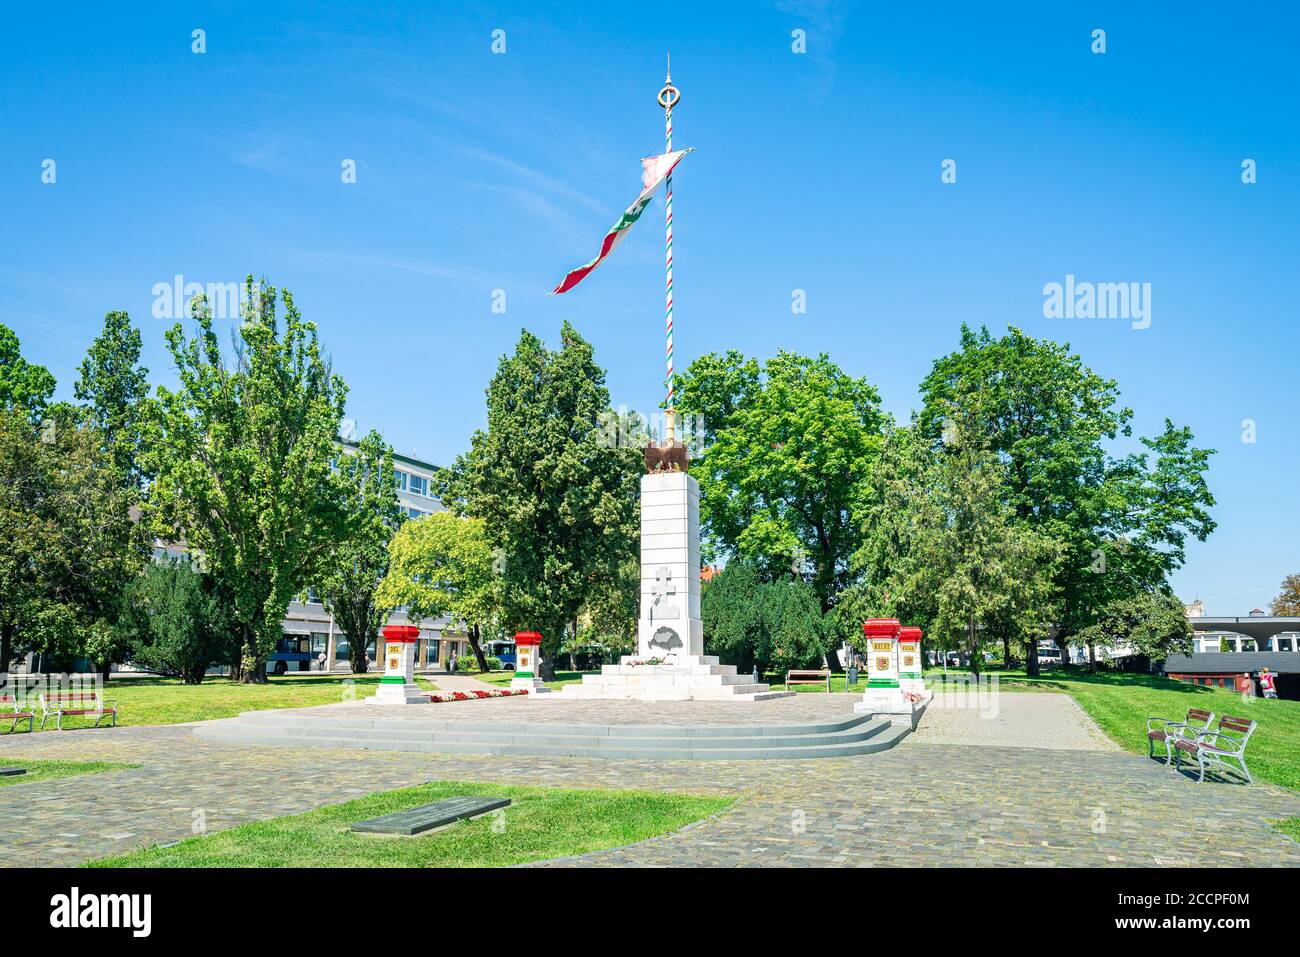 Trianon monument which symbolizes the 100th anniversary of the end of the First World War and the tragic division of Hungary's borders. Stock Photo